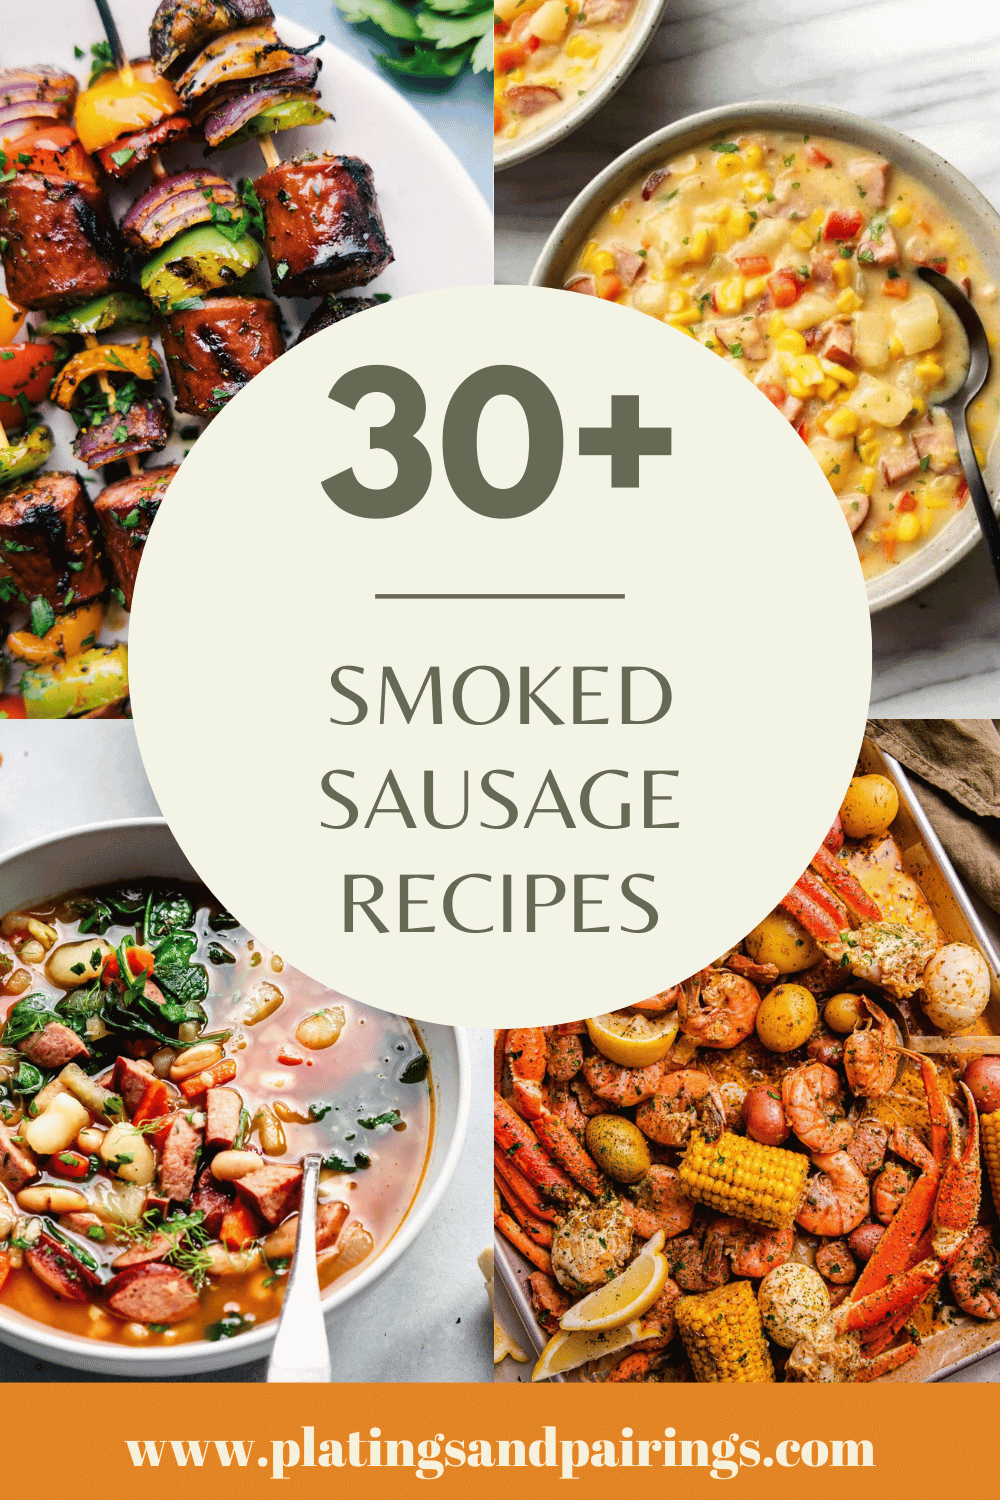 Collage of smoked sausage recipes with text overlay.